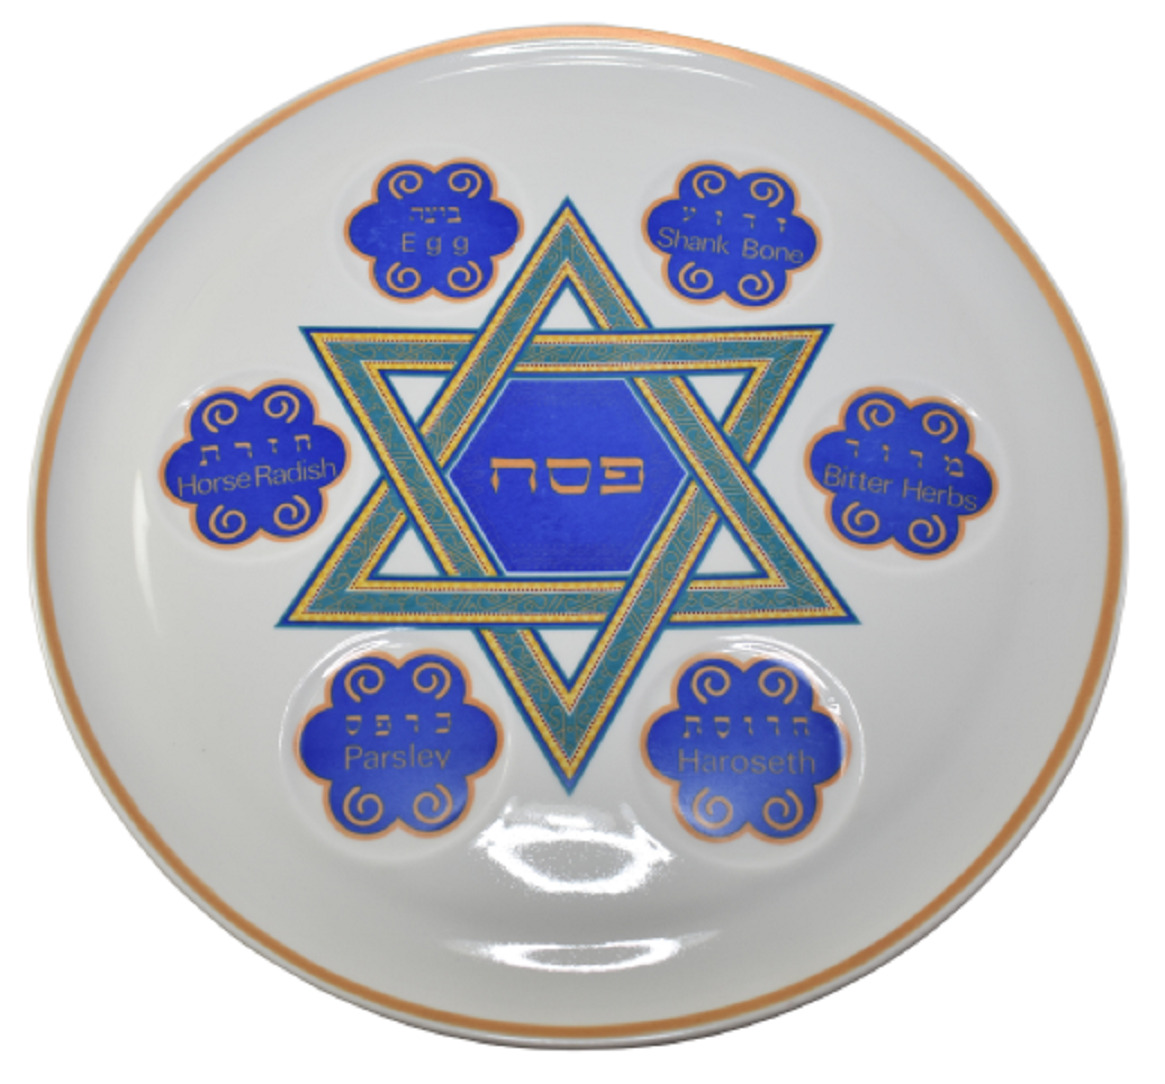 Passover Pesach Plate Vintage Classic Large Ceramic - Naama Fine China - Israel